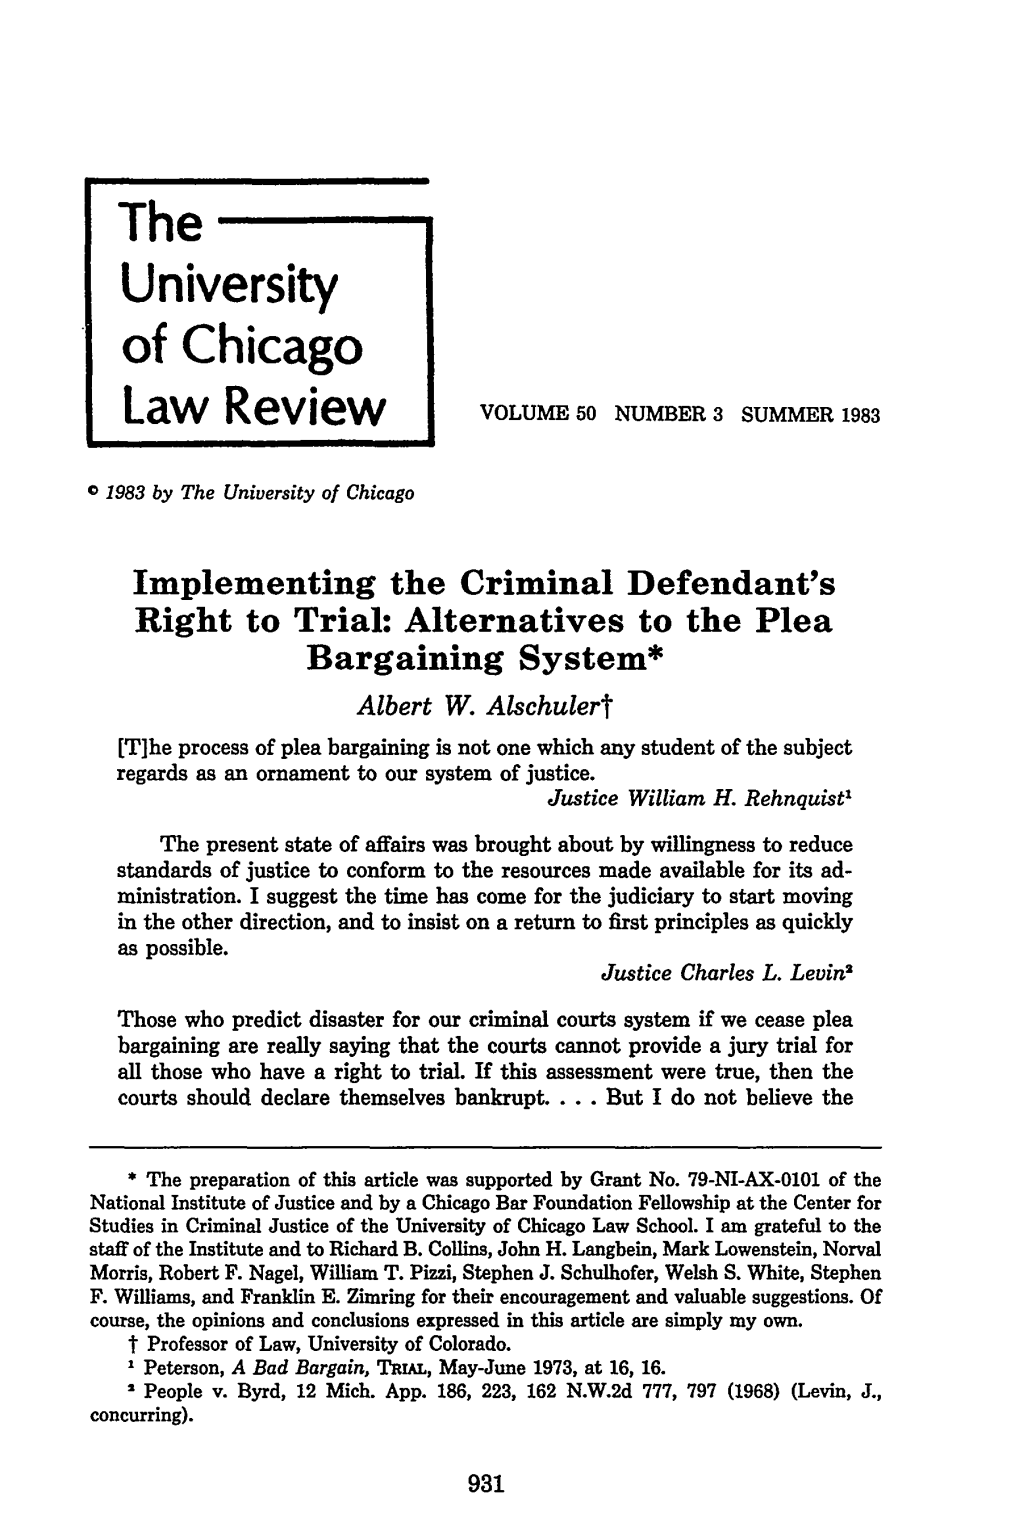 Implementing the Criminal Defendant's Right to Trial: Alternatives to the Plea Bargaining System* Albert W